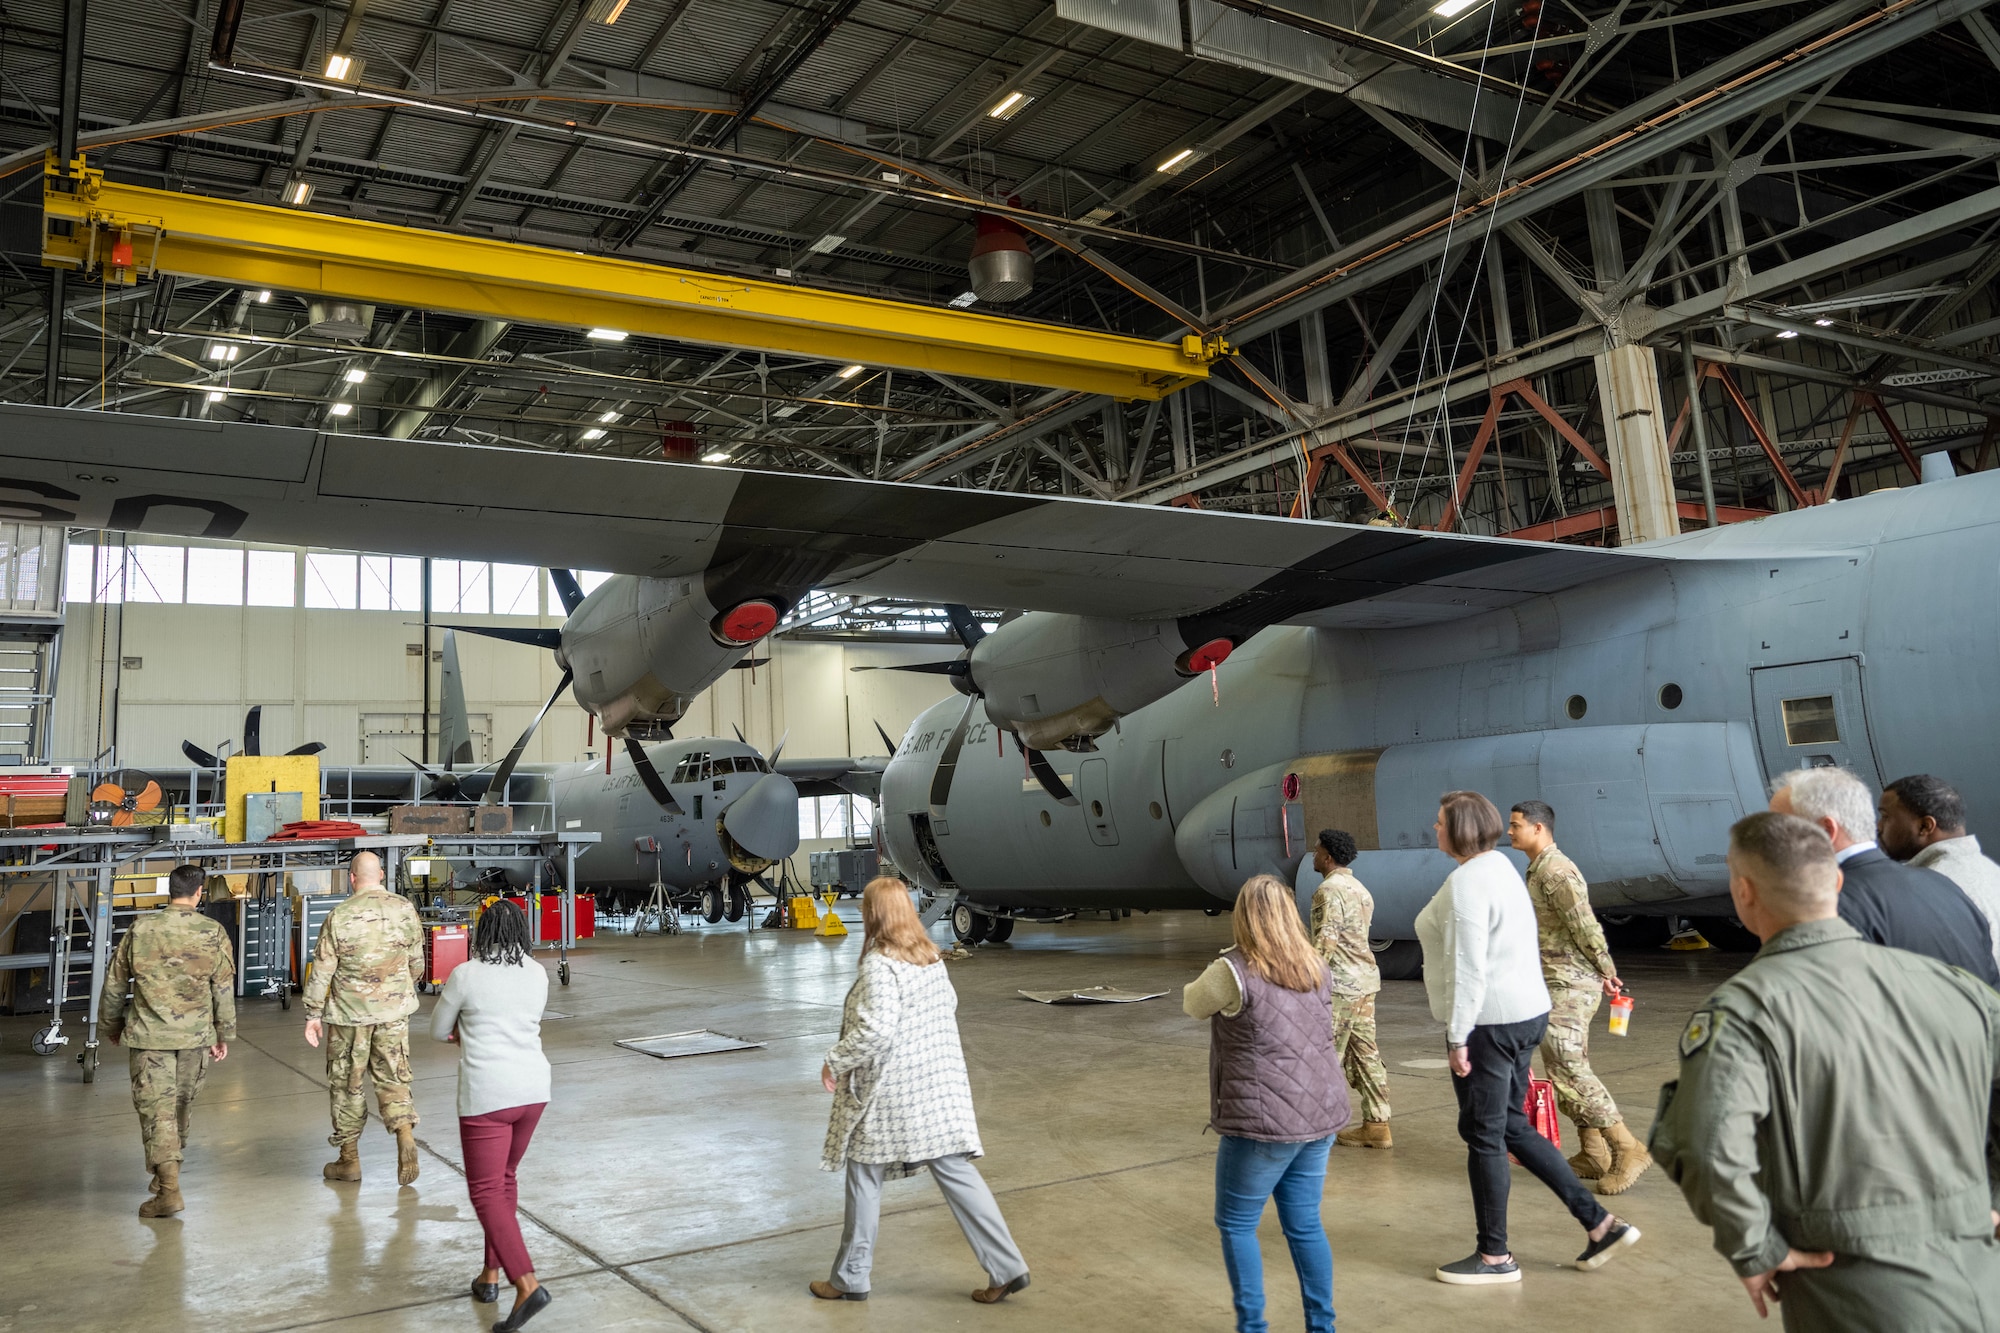 People walk around a C-130 in a group.